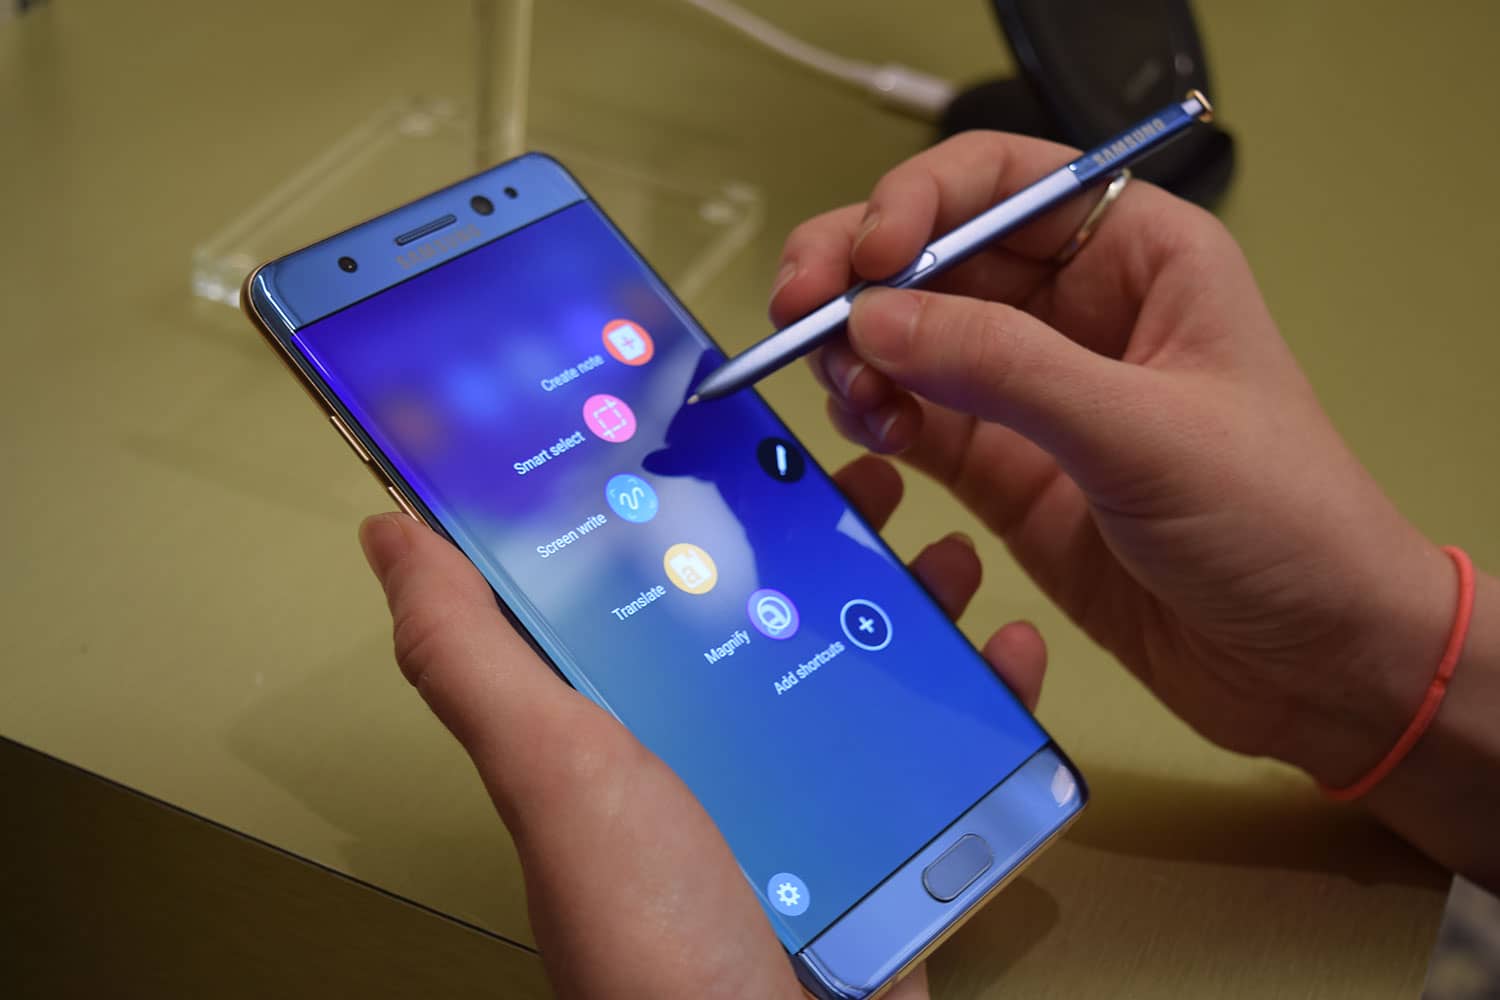 Galaxy Note 7 Refurbished leaked images (3)